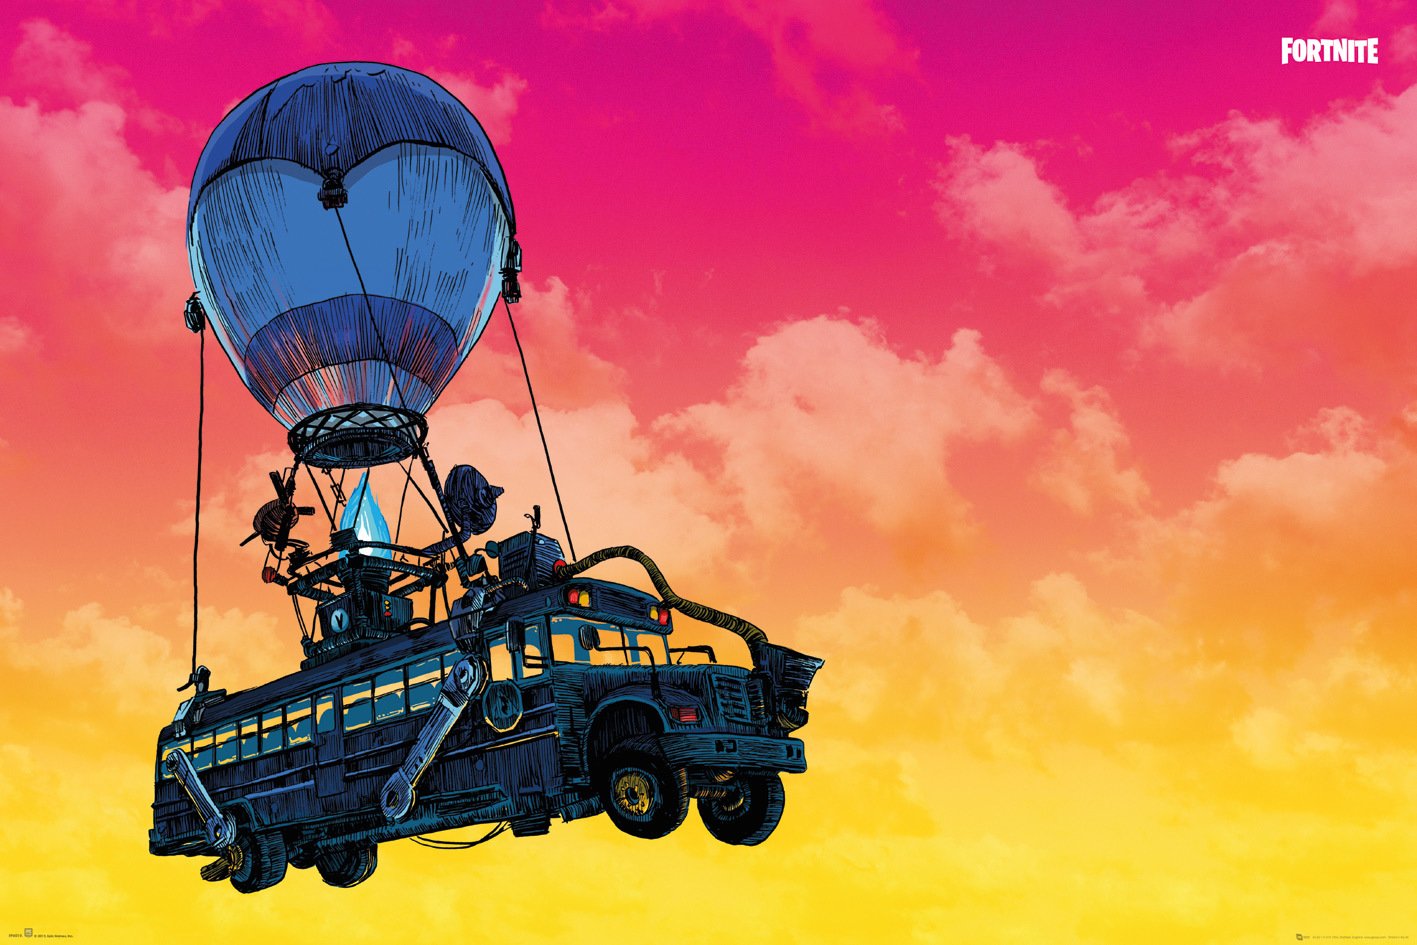 Fortnite Video Game Battle Bus Maxi Poster